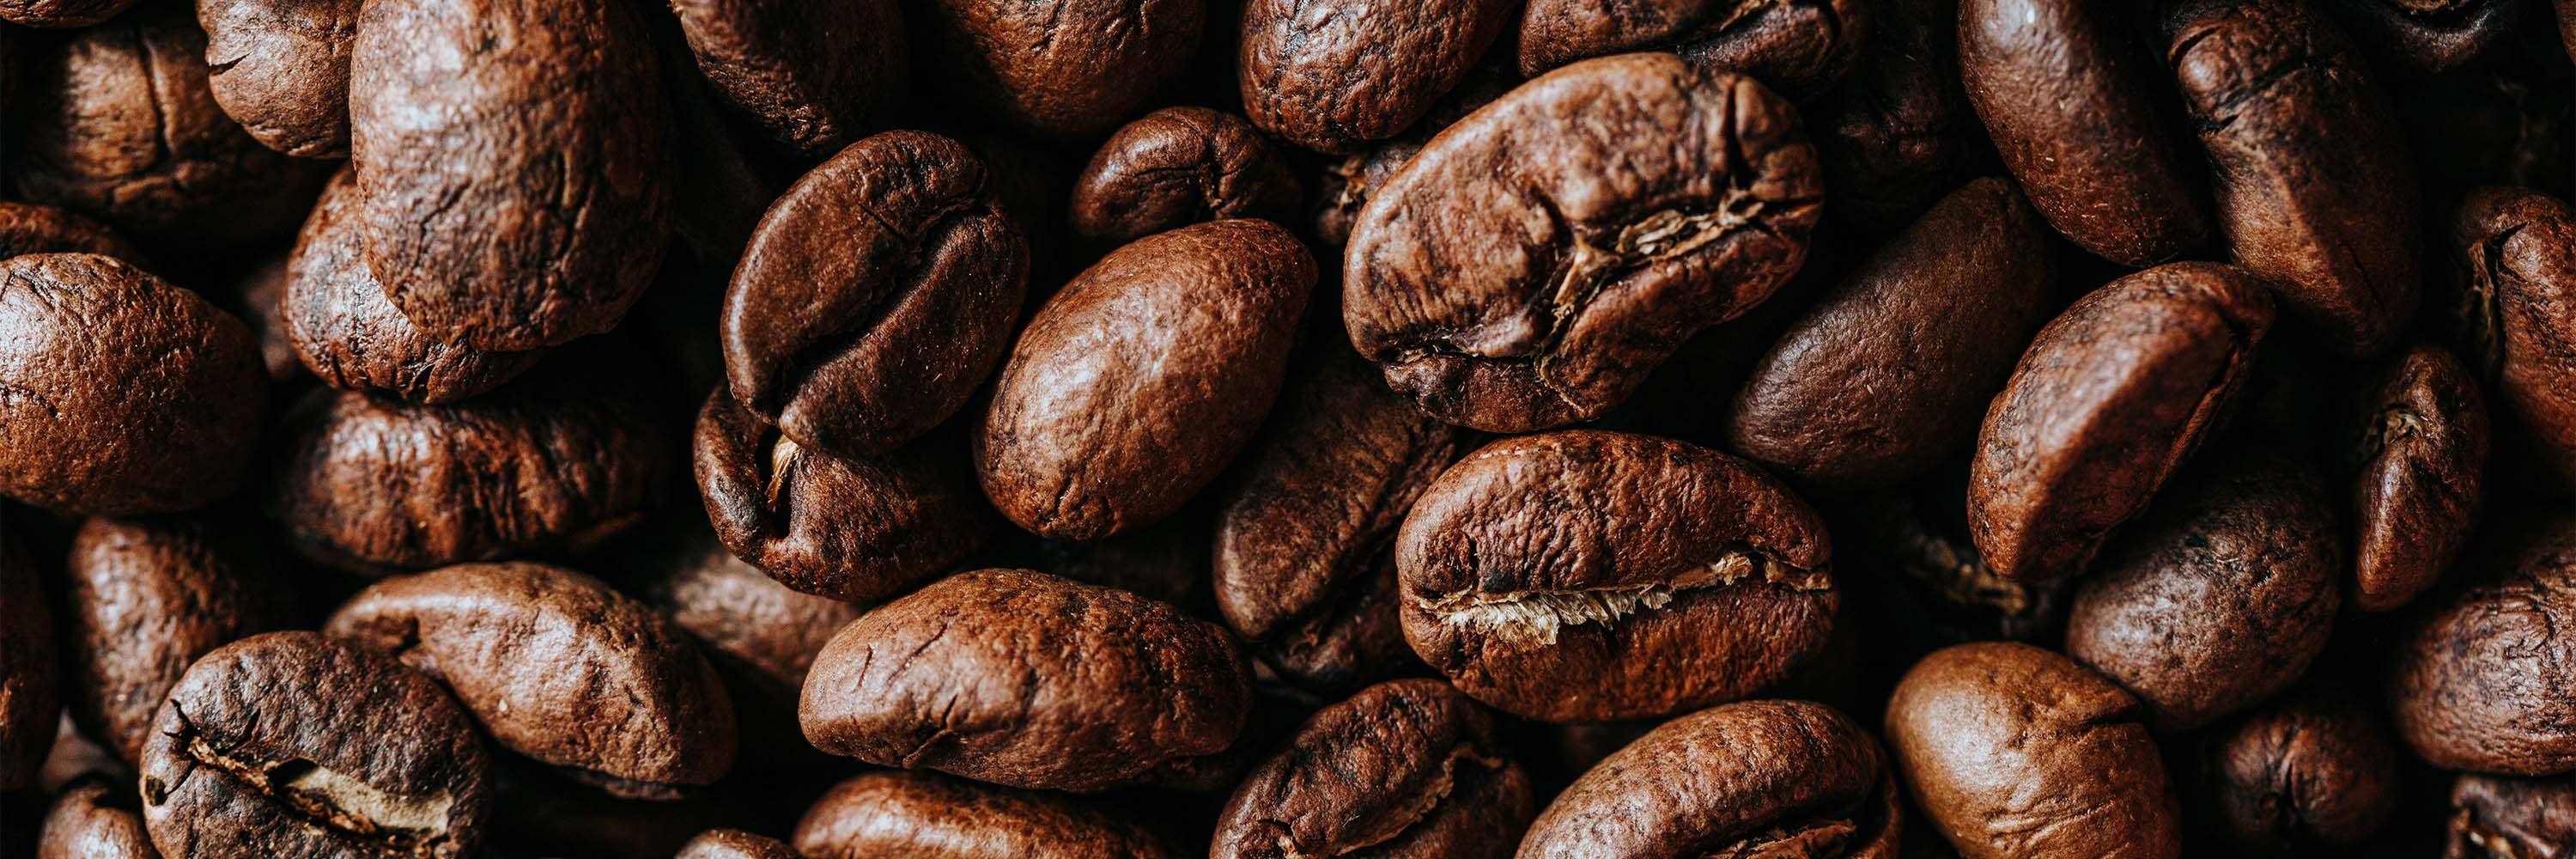 Wide close up image of coffee beans.